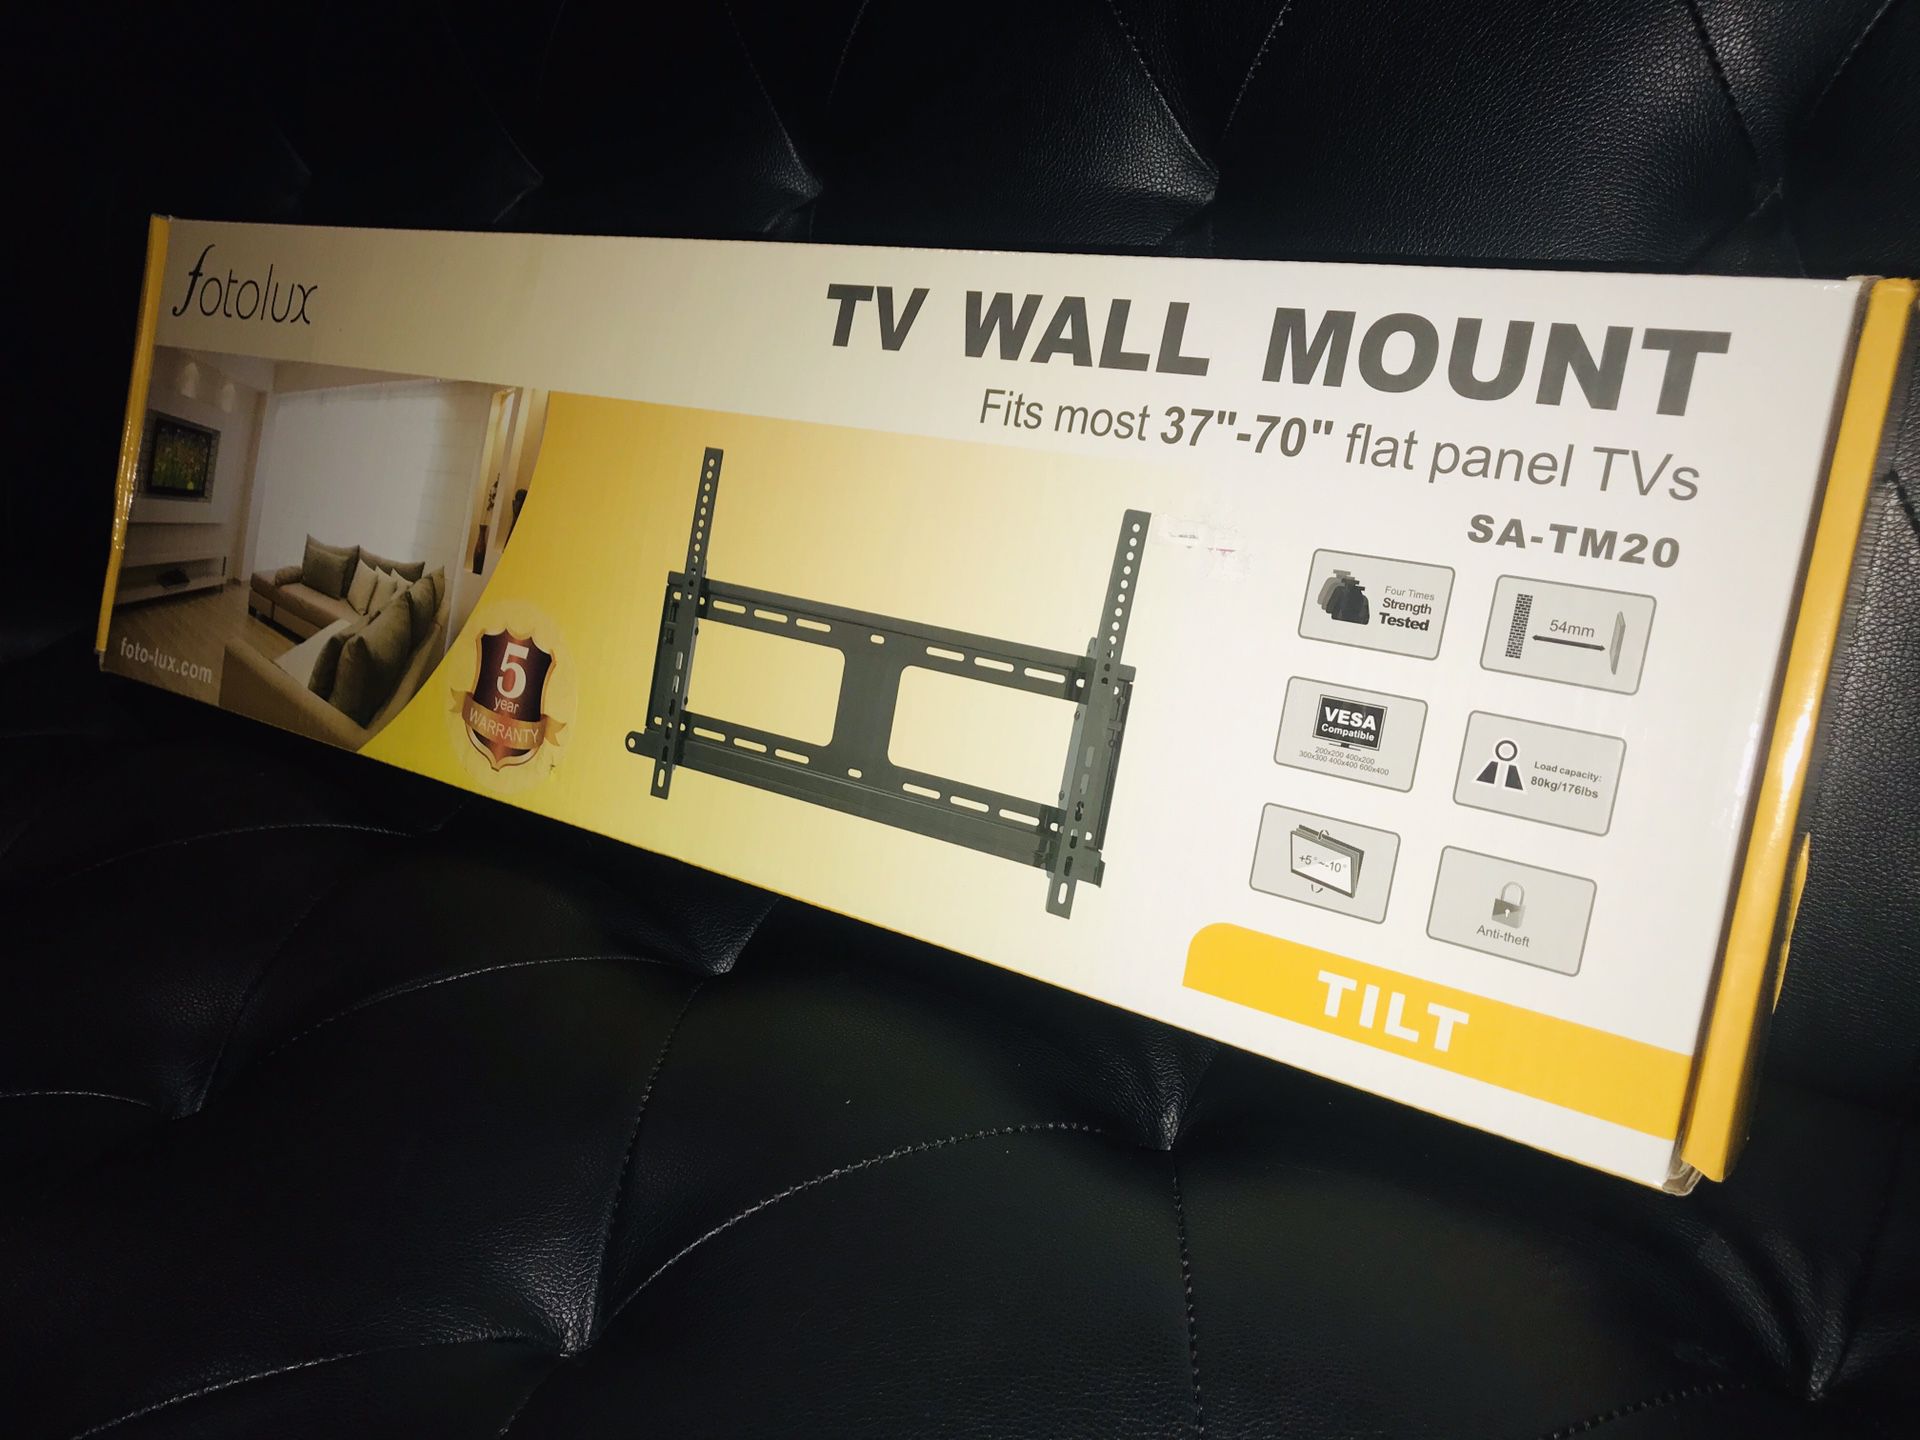 TV WALL MOUNT - TV STAND - Tilt TV mount. BRAND NEW . Hold 37” to 70” flat TV screens . 3 AVAILABLE -...SMART TV LED TV .TV